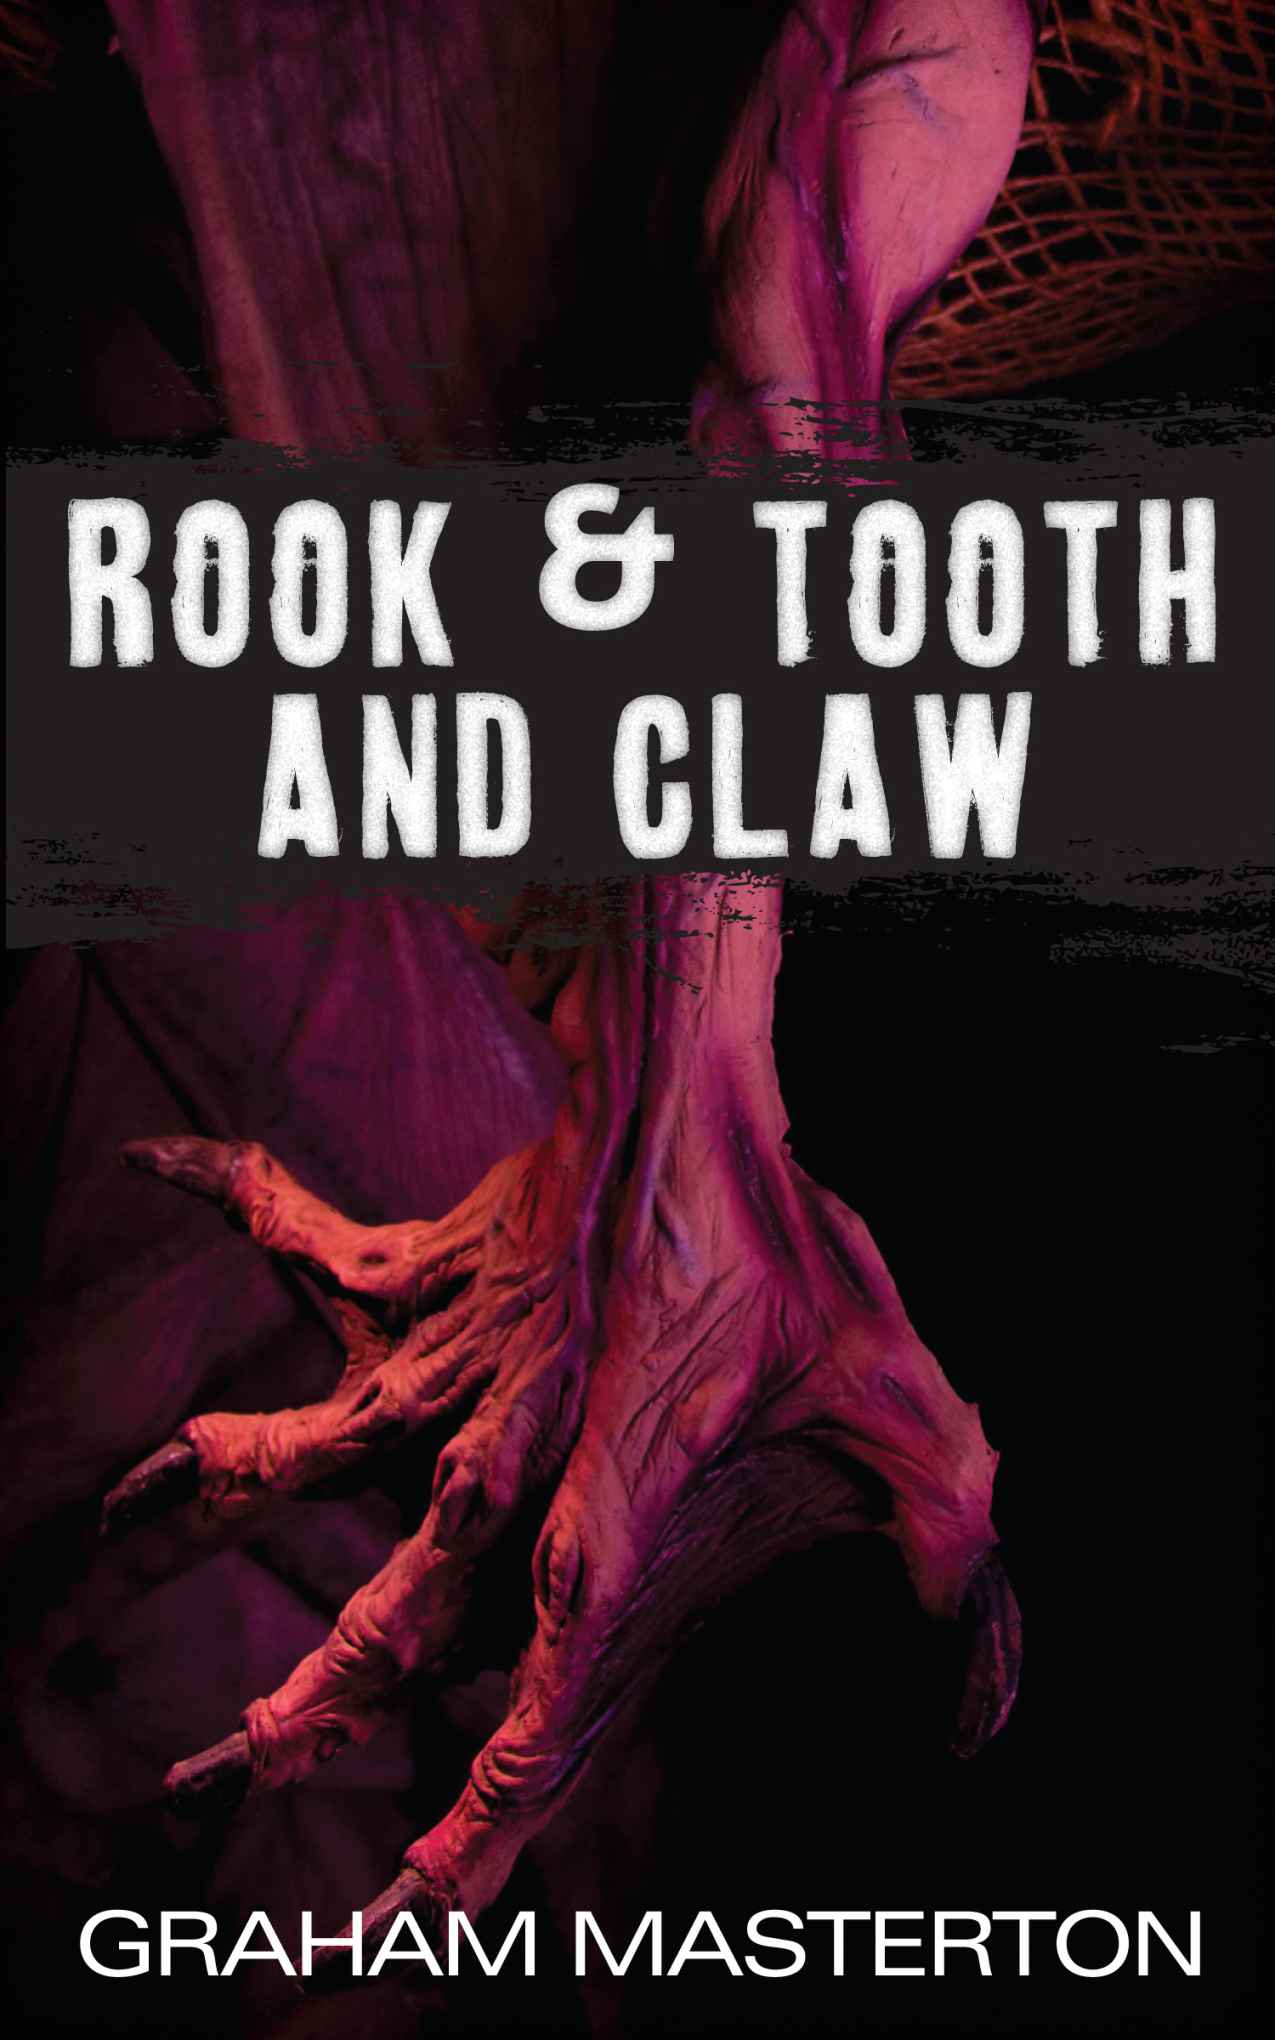 Rook & Tooth and Claw